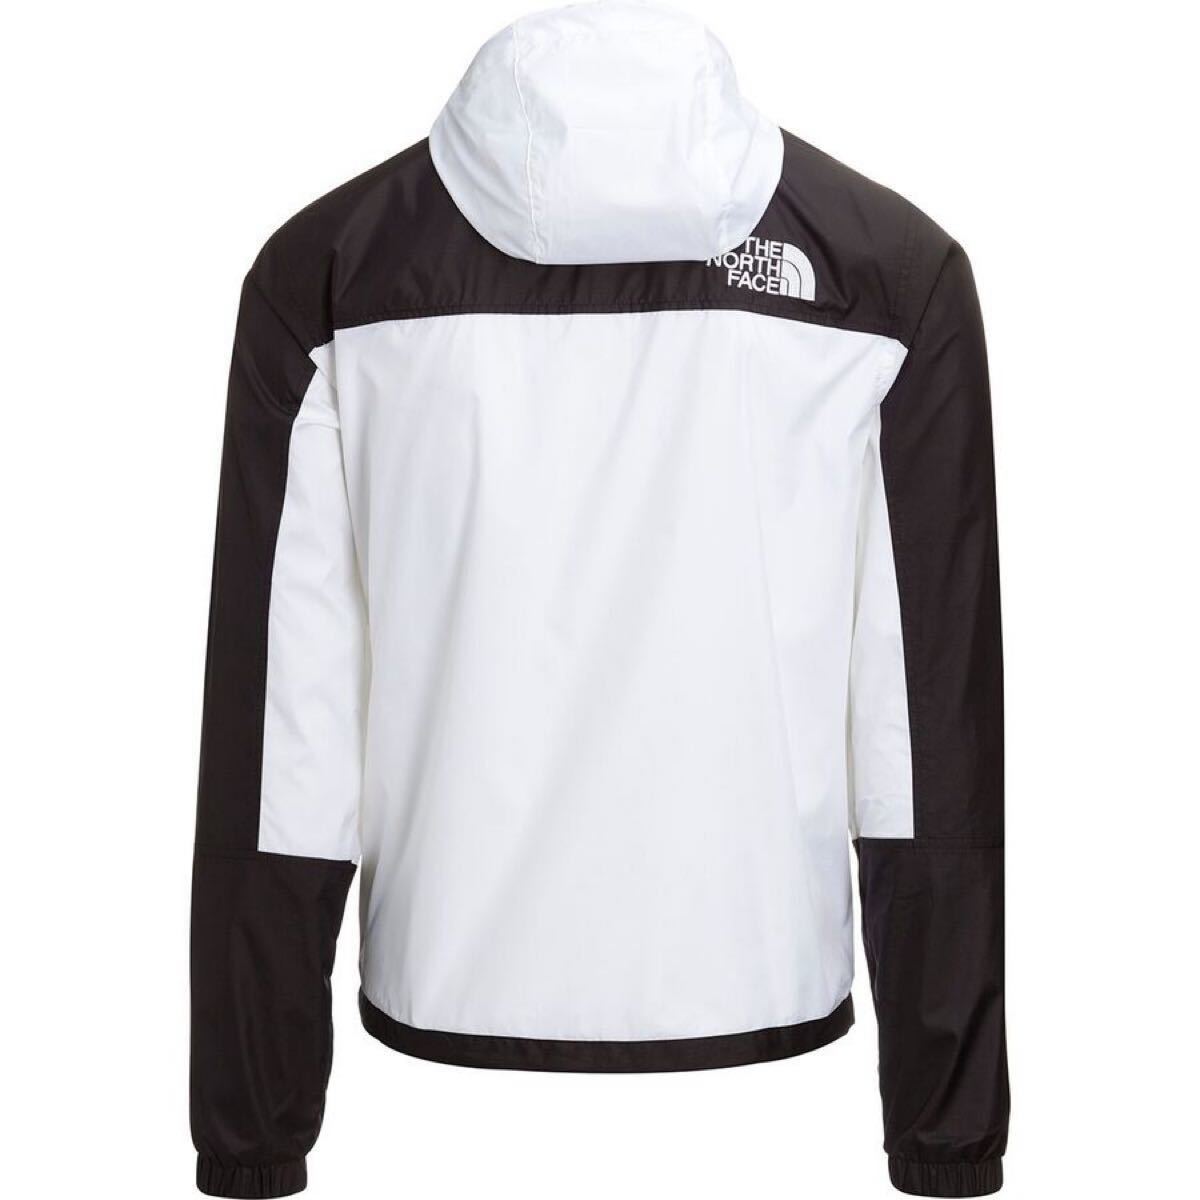 The North Face HMLYN Wind Shell - Men's HOODIE フーディー JACKET